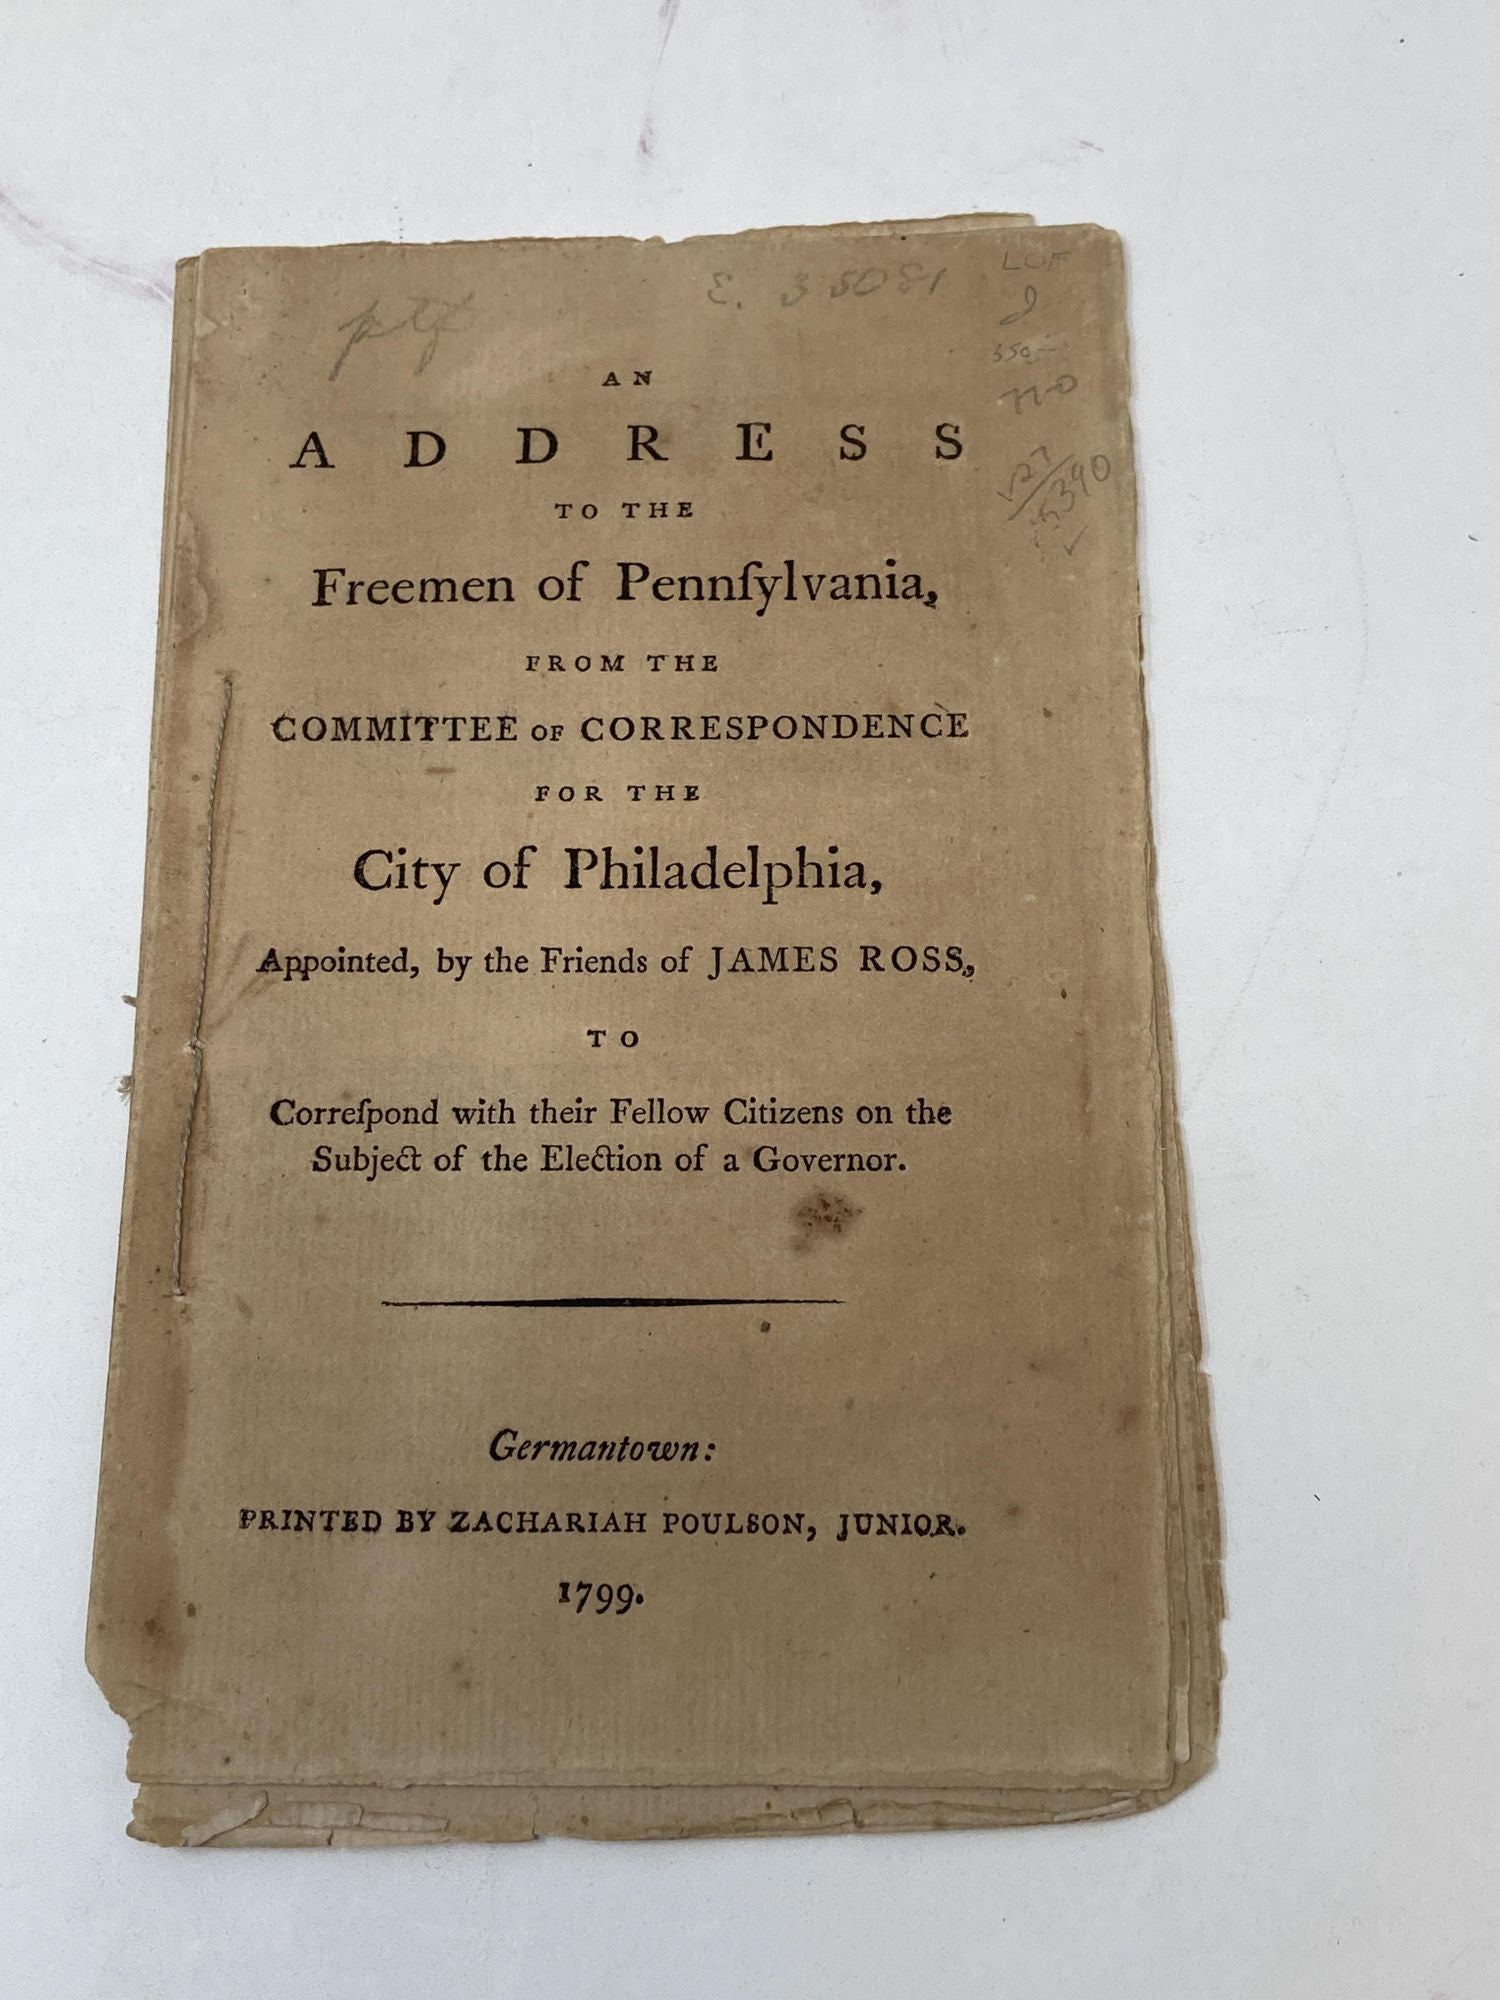 Hopkinson, Joseph - An Address to the Freemen of Pennsylvania, from the Committee of Correspondence for the City of Philadelphia, Appointed, by the Friends of James Ross, to Correspond with Their Fellow Citizens on the Subject of the Election of a Governor